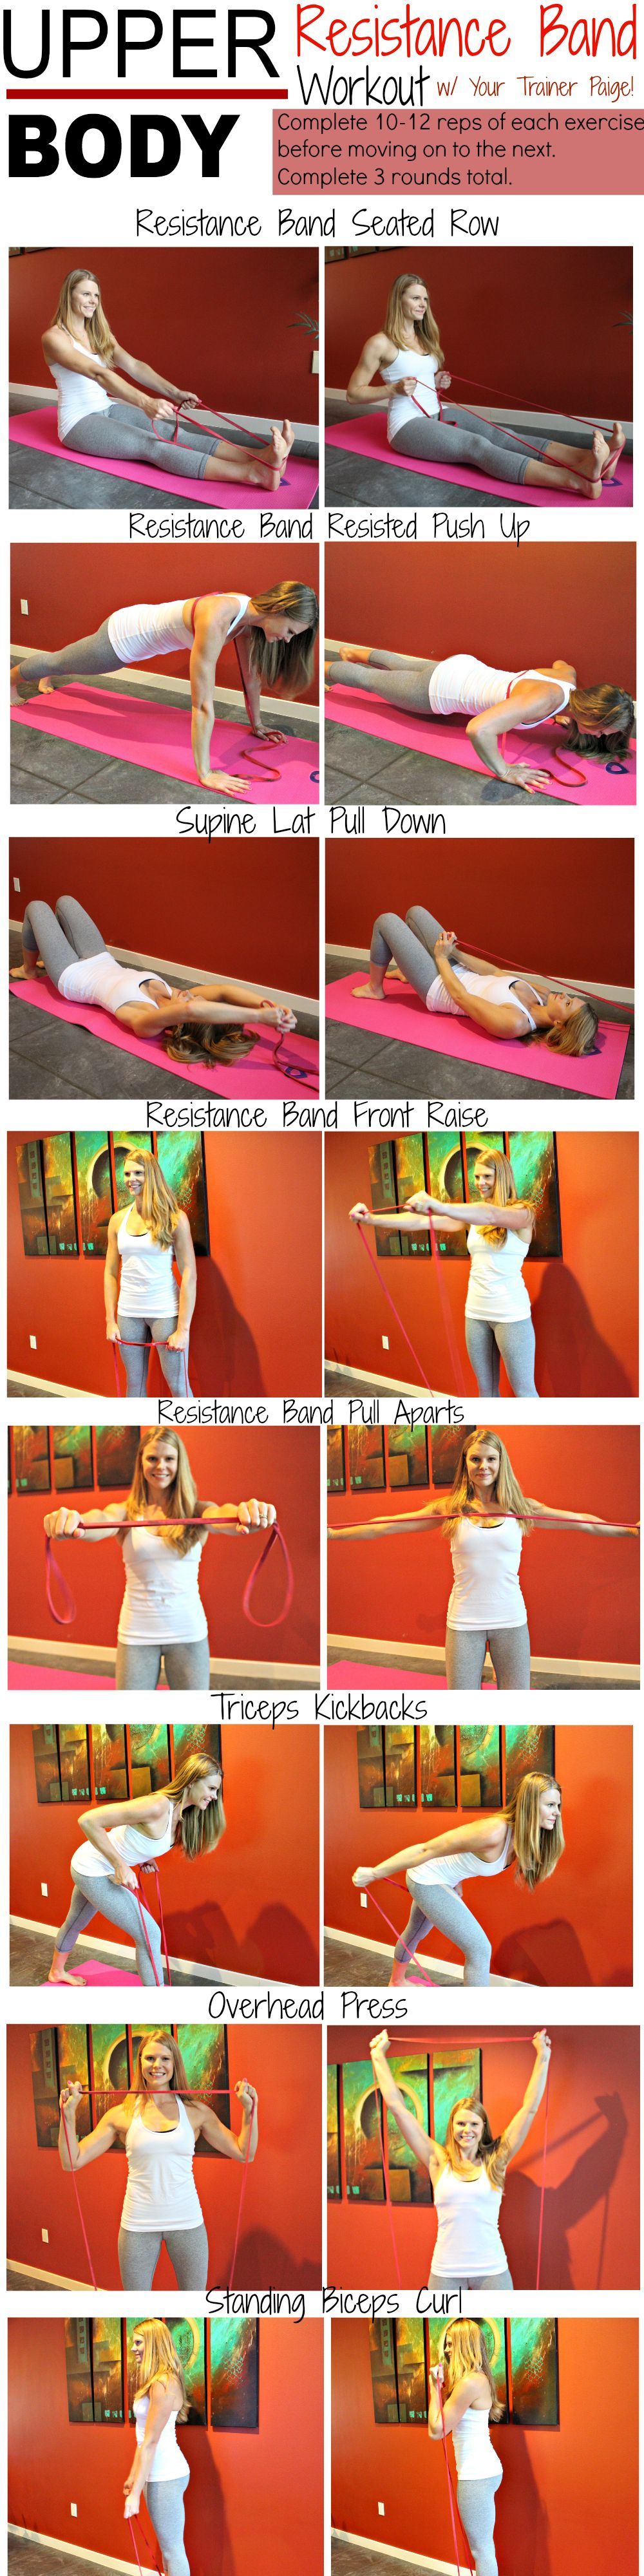 Upper Body Resistance Band Workout for Strong Arms. Pin now, check later.